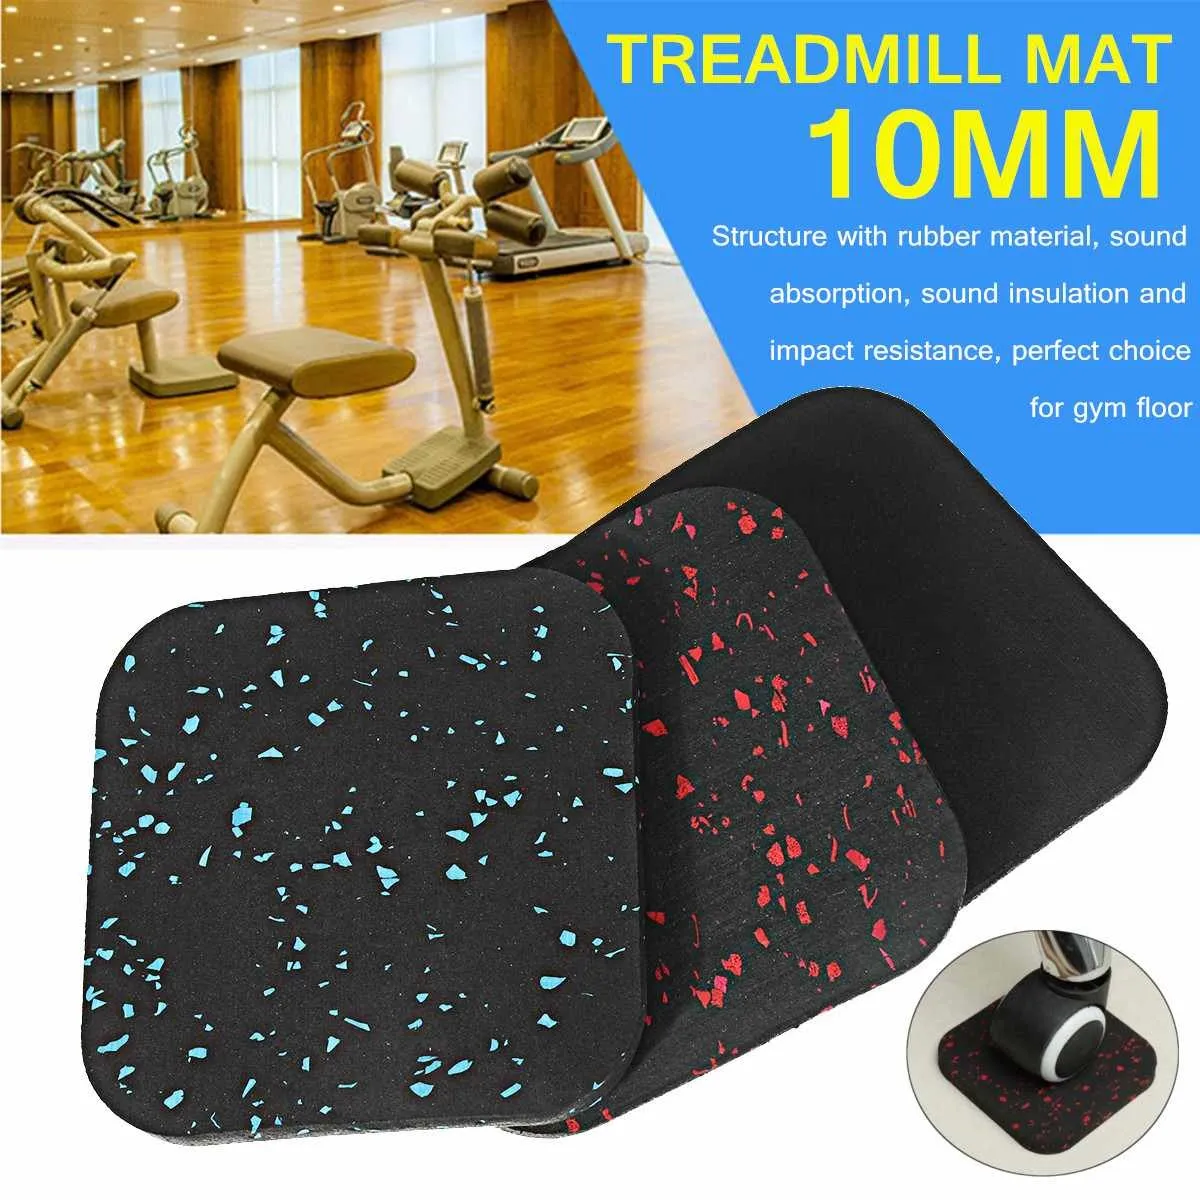 Rubber Treadmill Mat Protector Shockproof Cushion Exercise Gym Running Workout Fitness Equipment 10x10cm Sport High Density Hardwood Floor and Carpet Protection